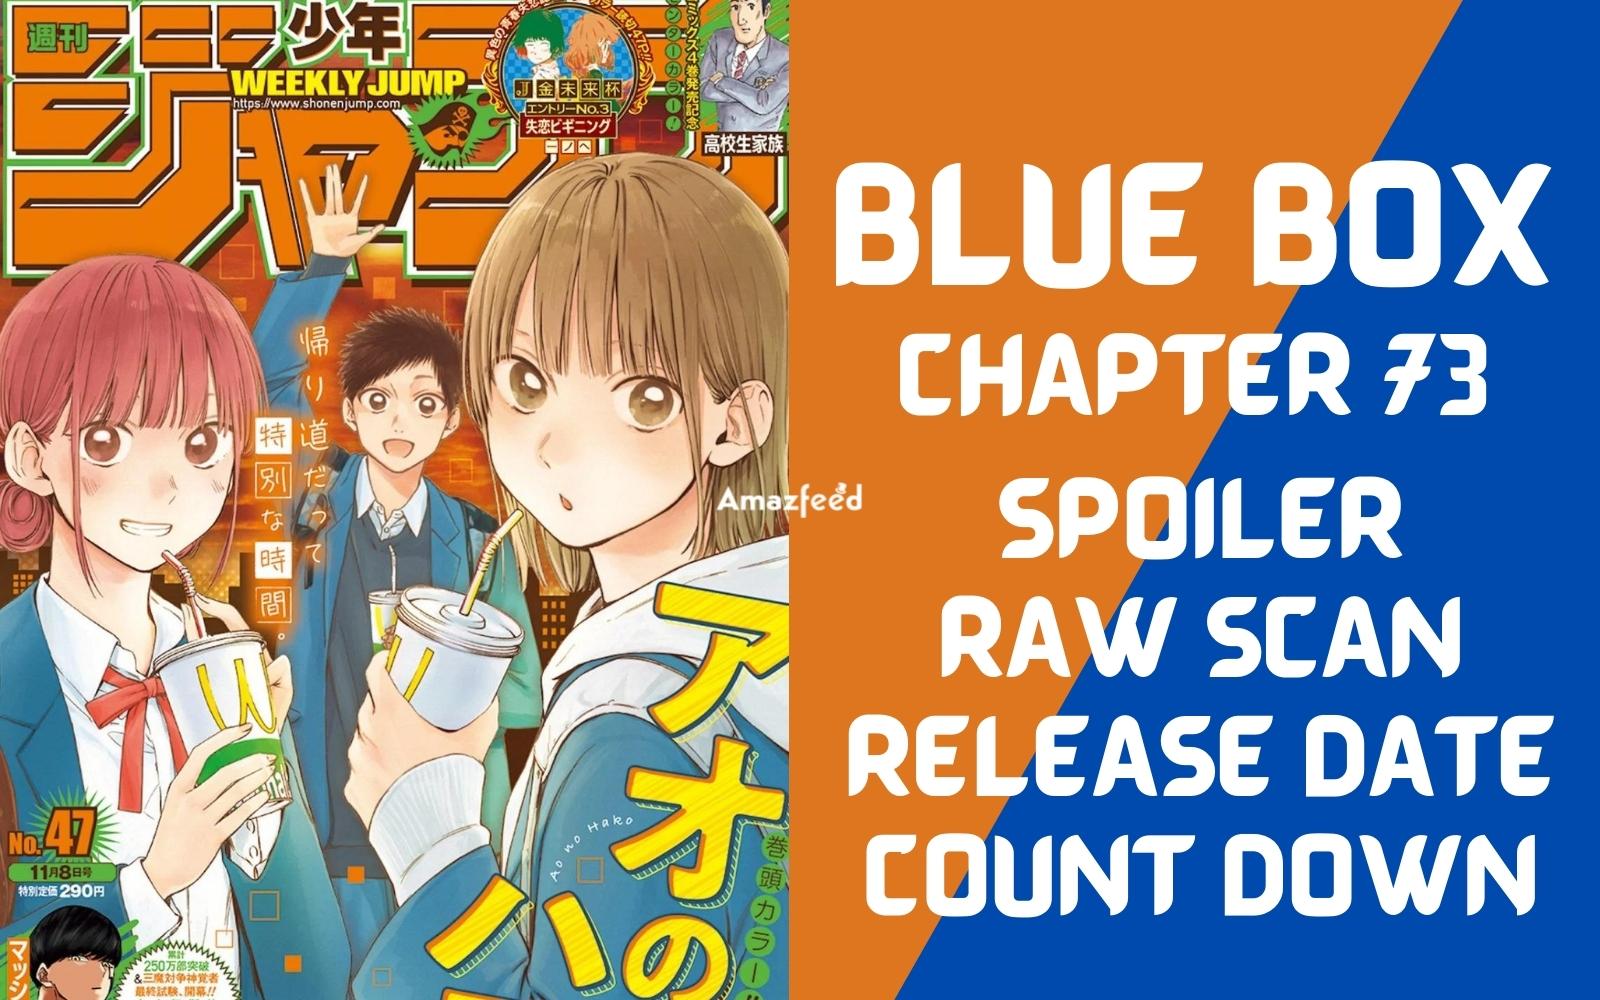 Blue Box Chapter 73 Spoiler, Raw Scan, Countdown, Release Date